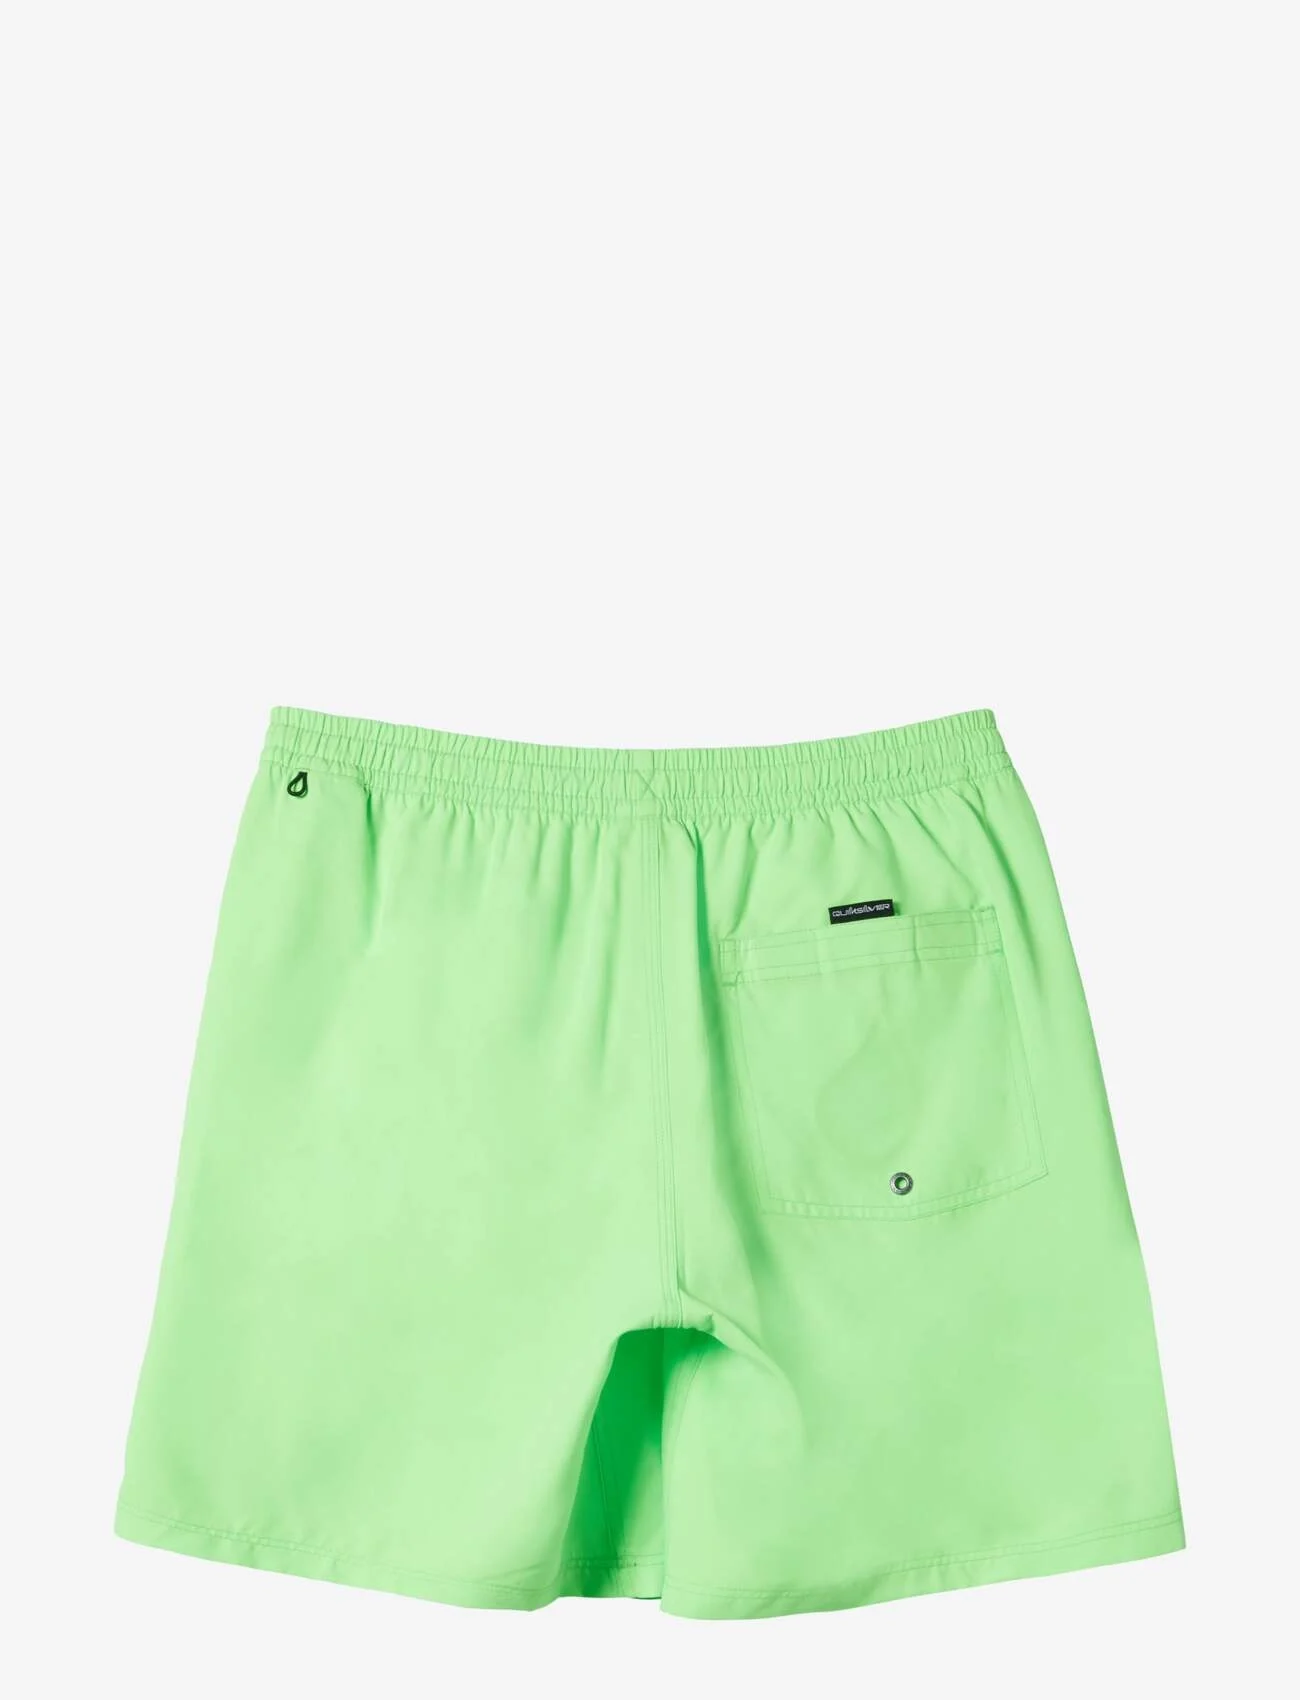 Quiksilver - EVERYDAY SOLID VOLLEY YTH 14 - swim shorts - green gecko - 1